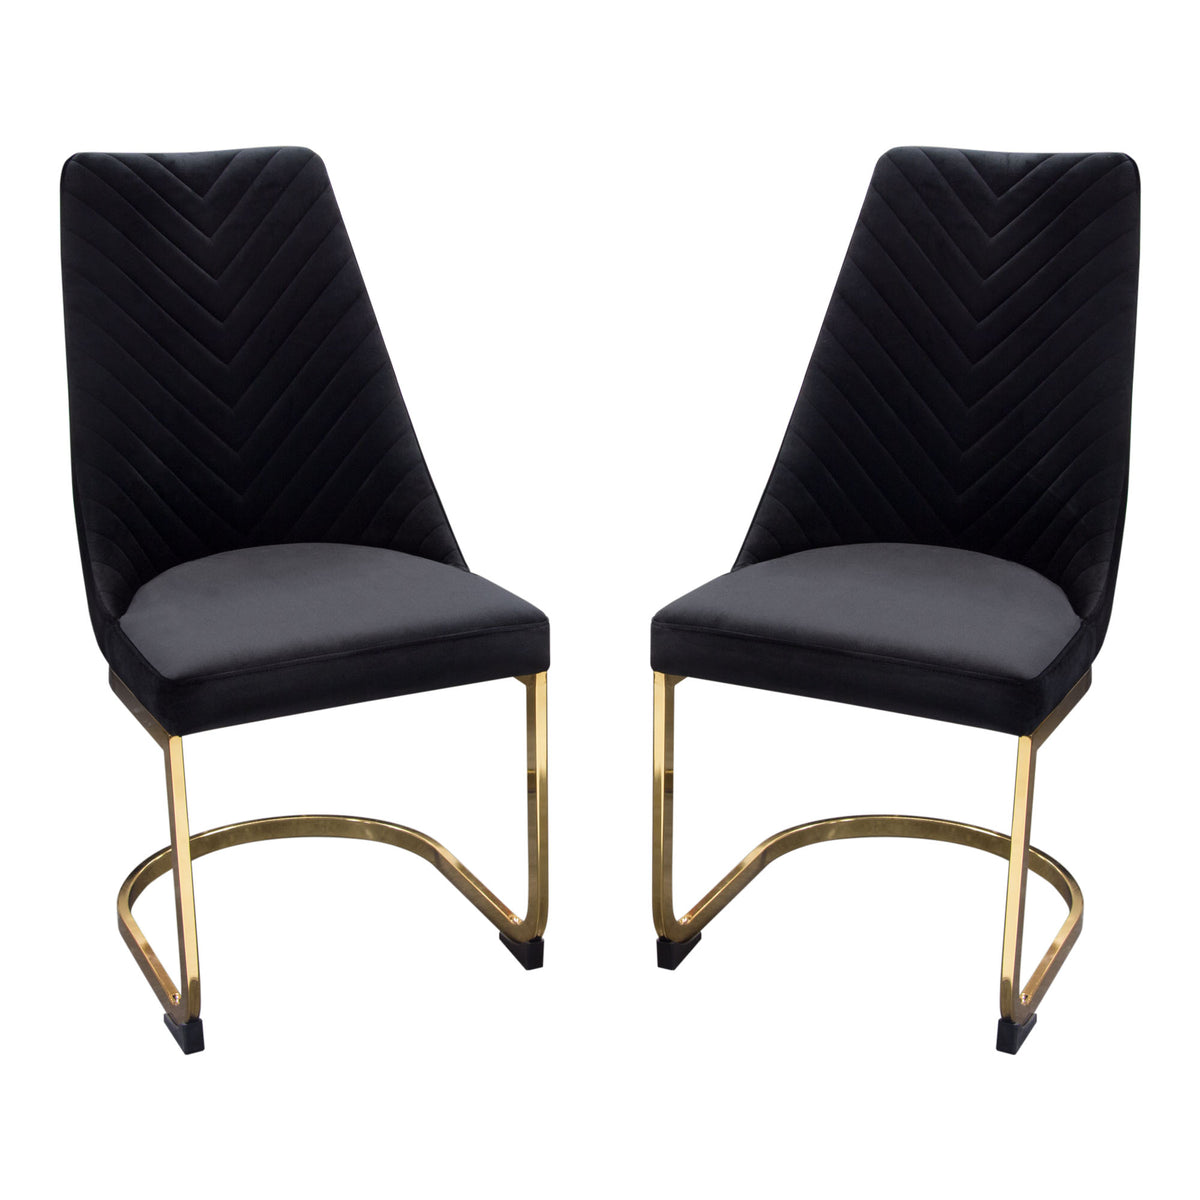 Zuzi Black Velvet with Polished Gold Dining Chair (Set of 2) - Luxury Living Collection